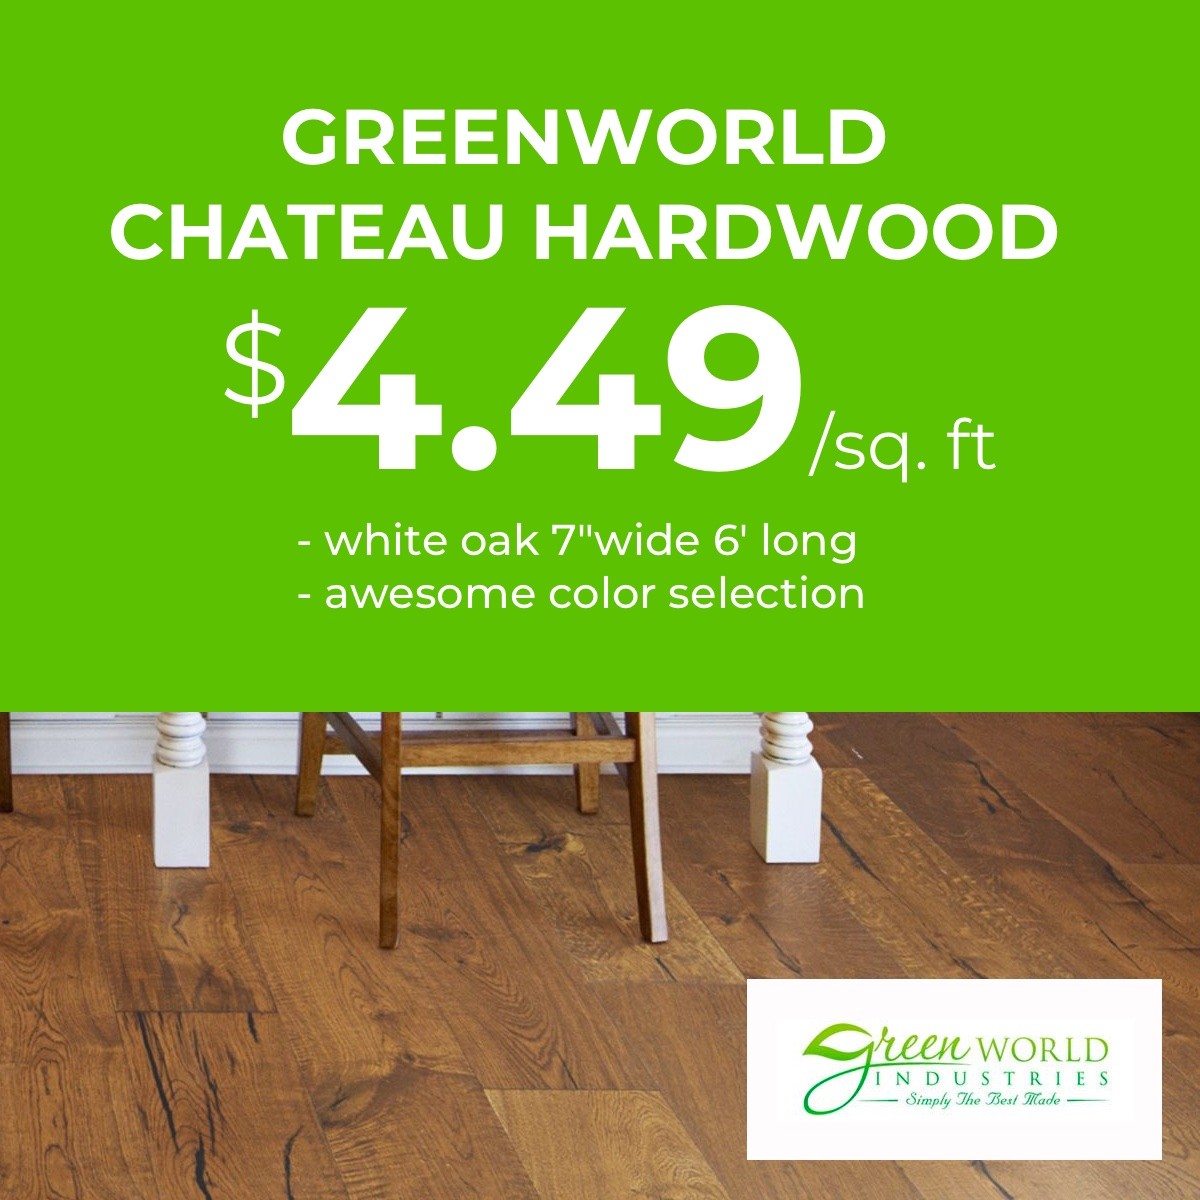 Greenworld Chateau Hardwood - $4.49/sq. ft. - white oak 7"wide 6' long - awesome color selection